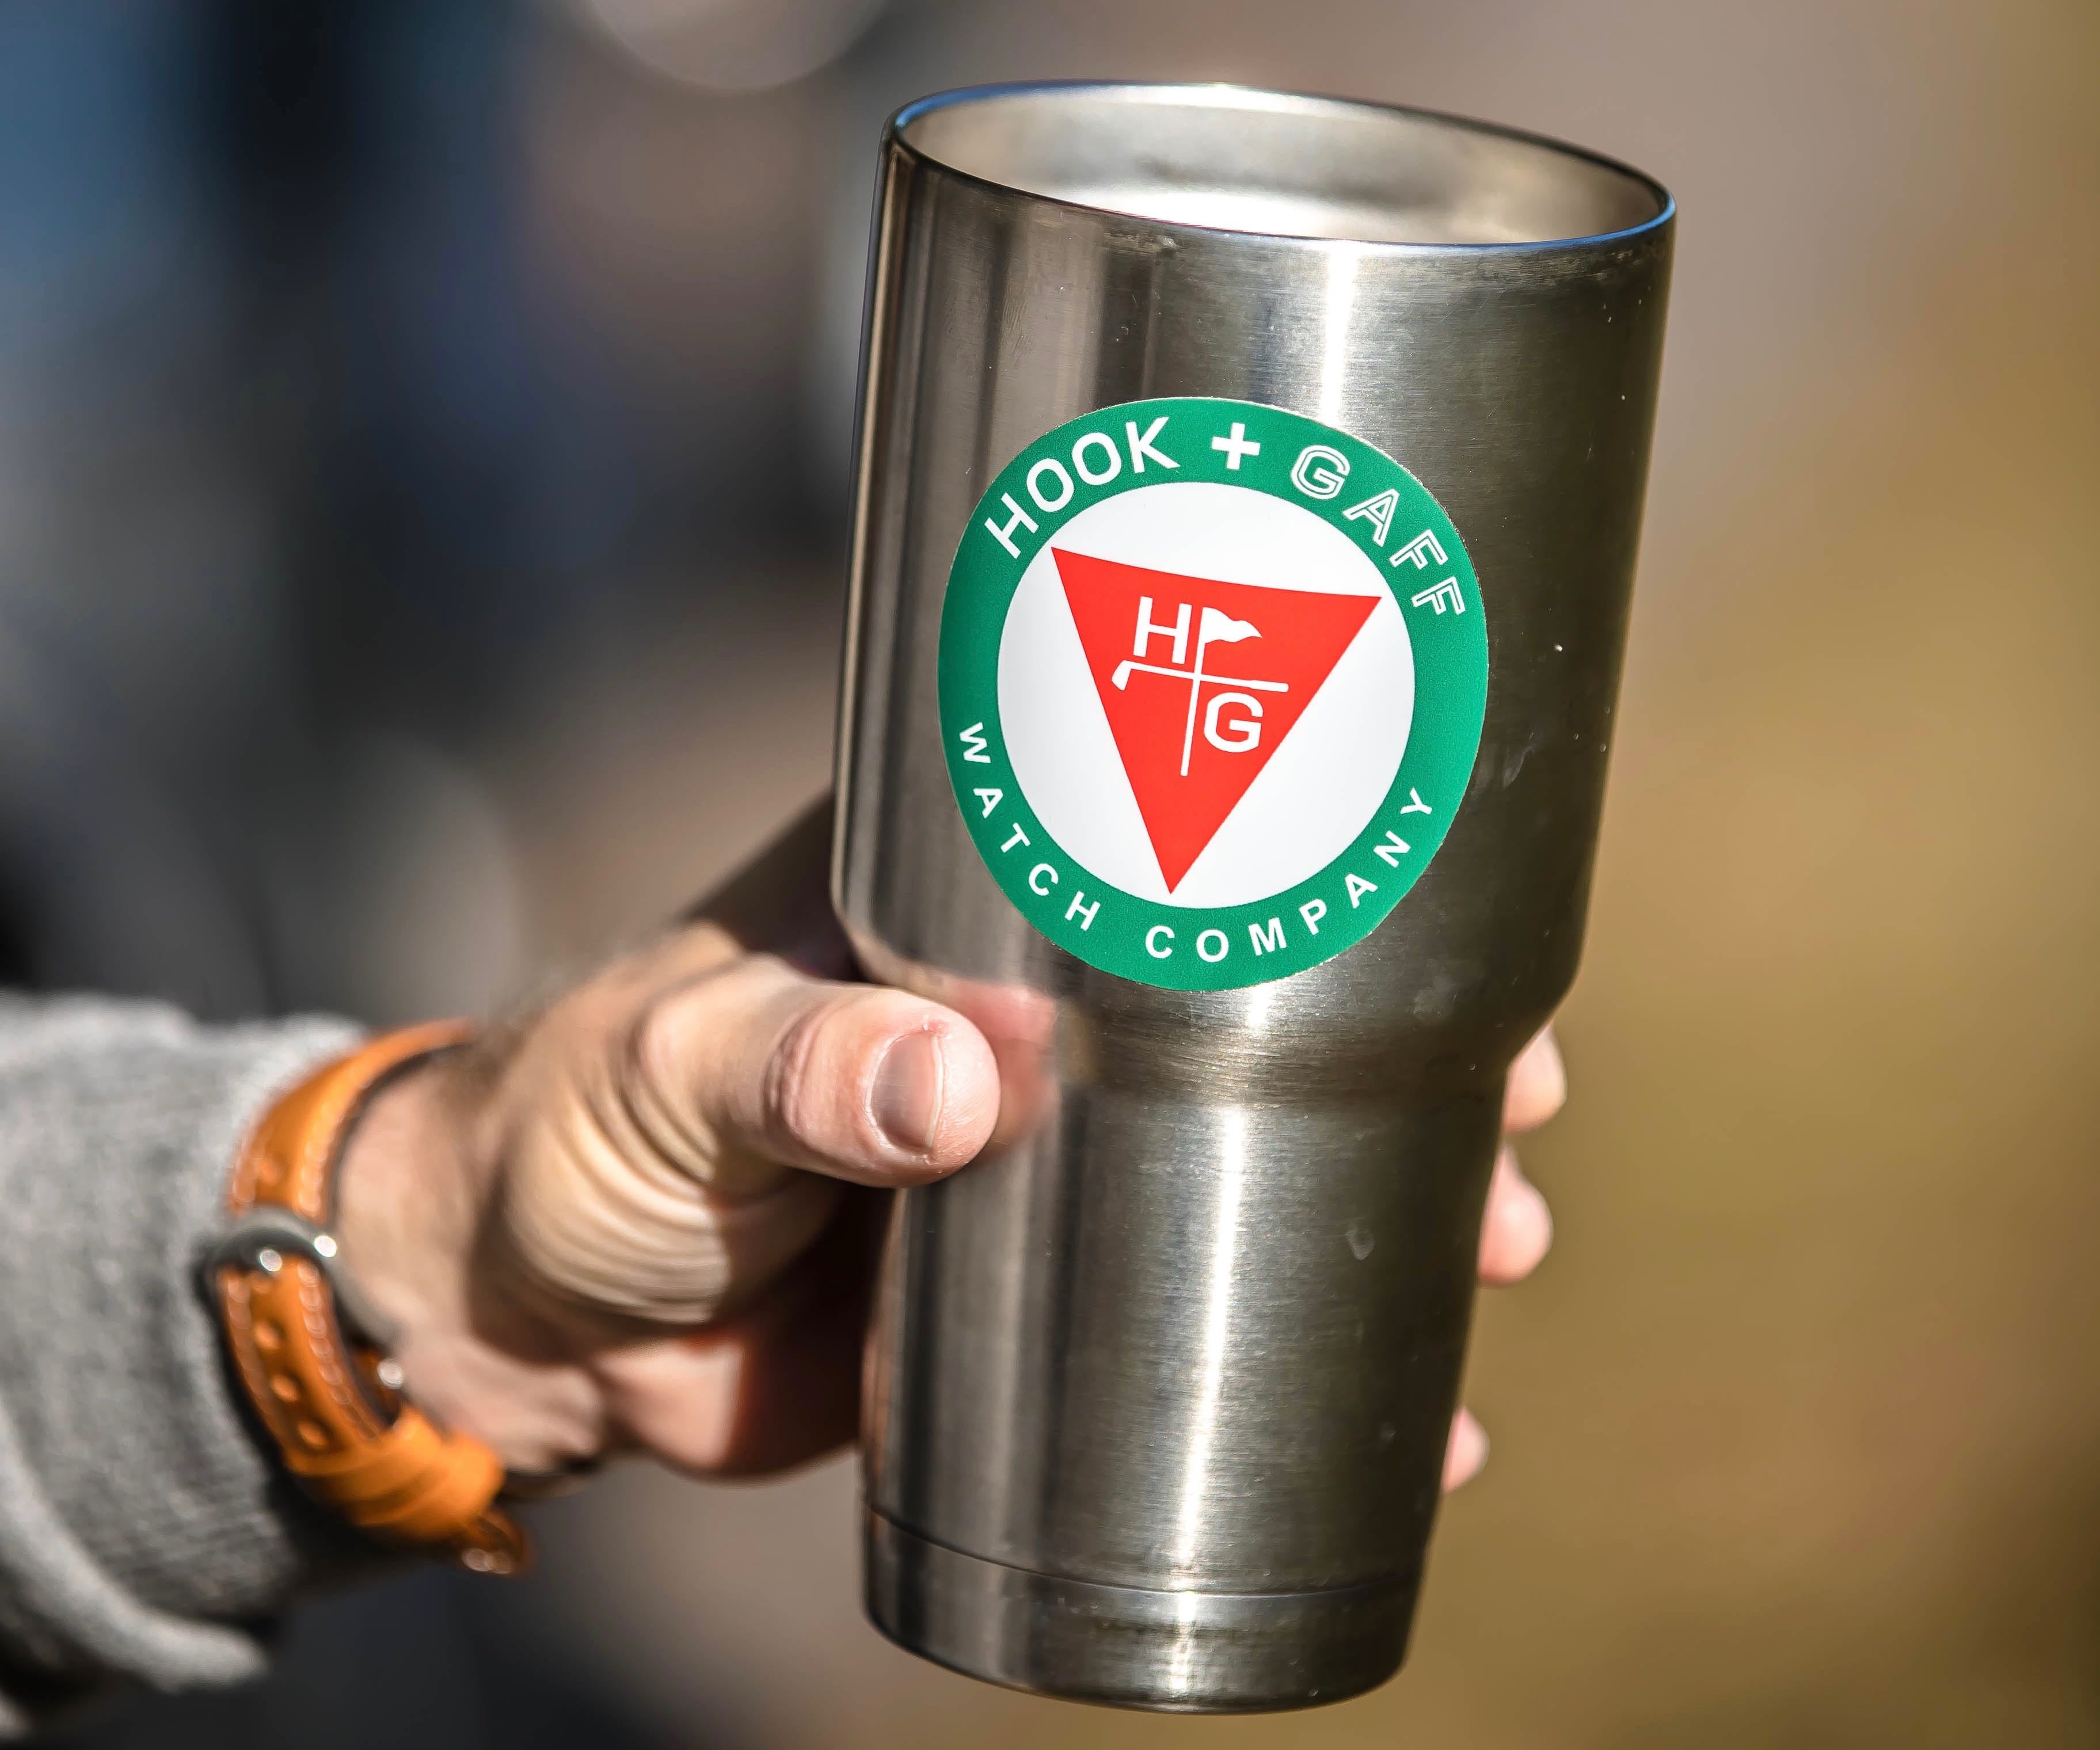 Golf Merit Badge Decal on cup